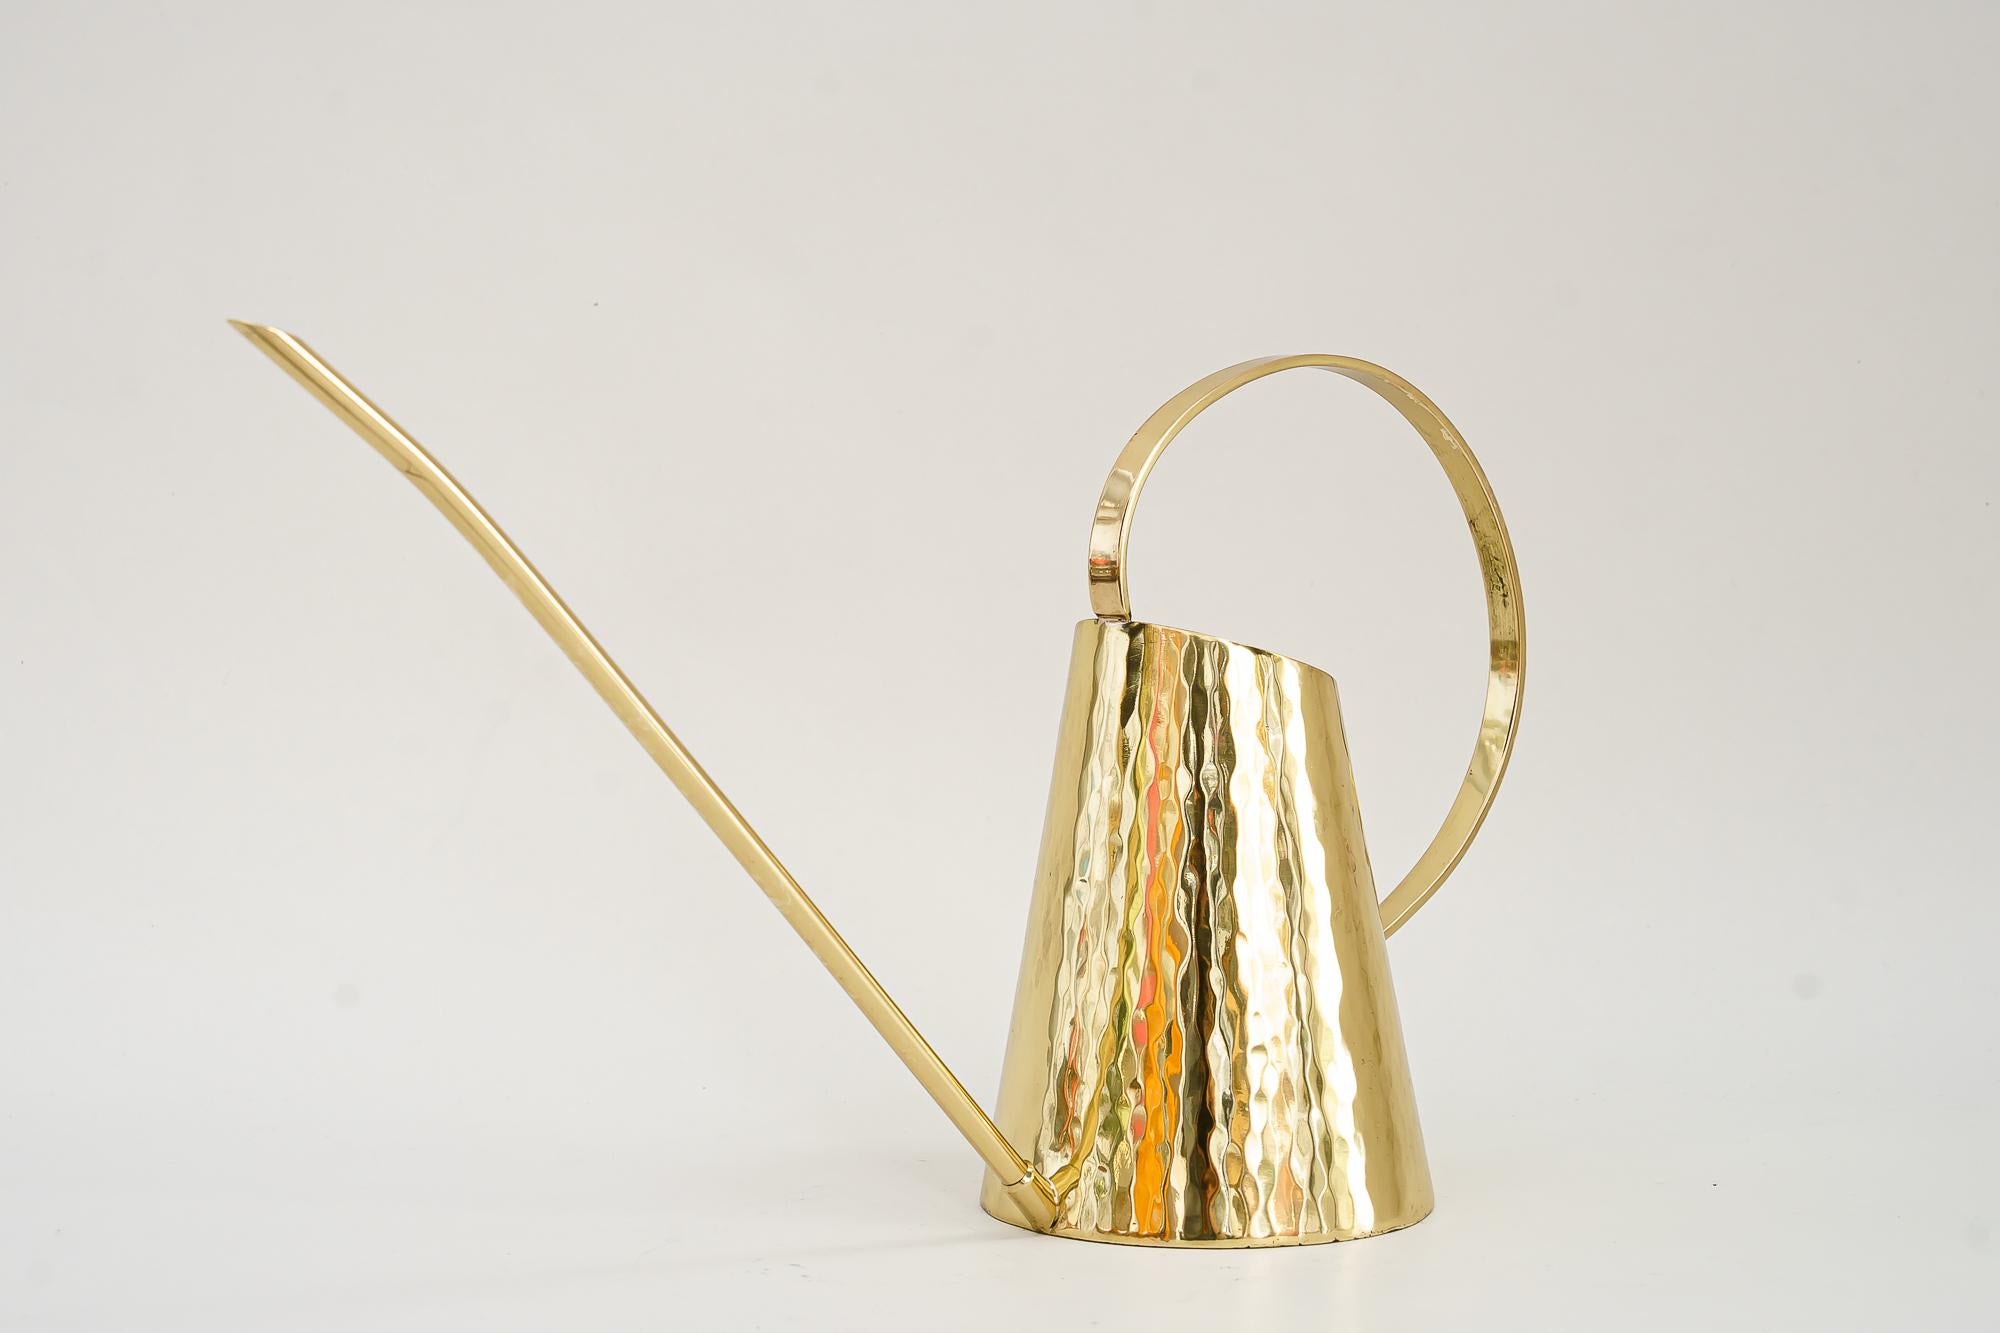 Art Deco hammered watering can, circa 1920s
Polished and stove enameled.